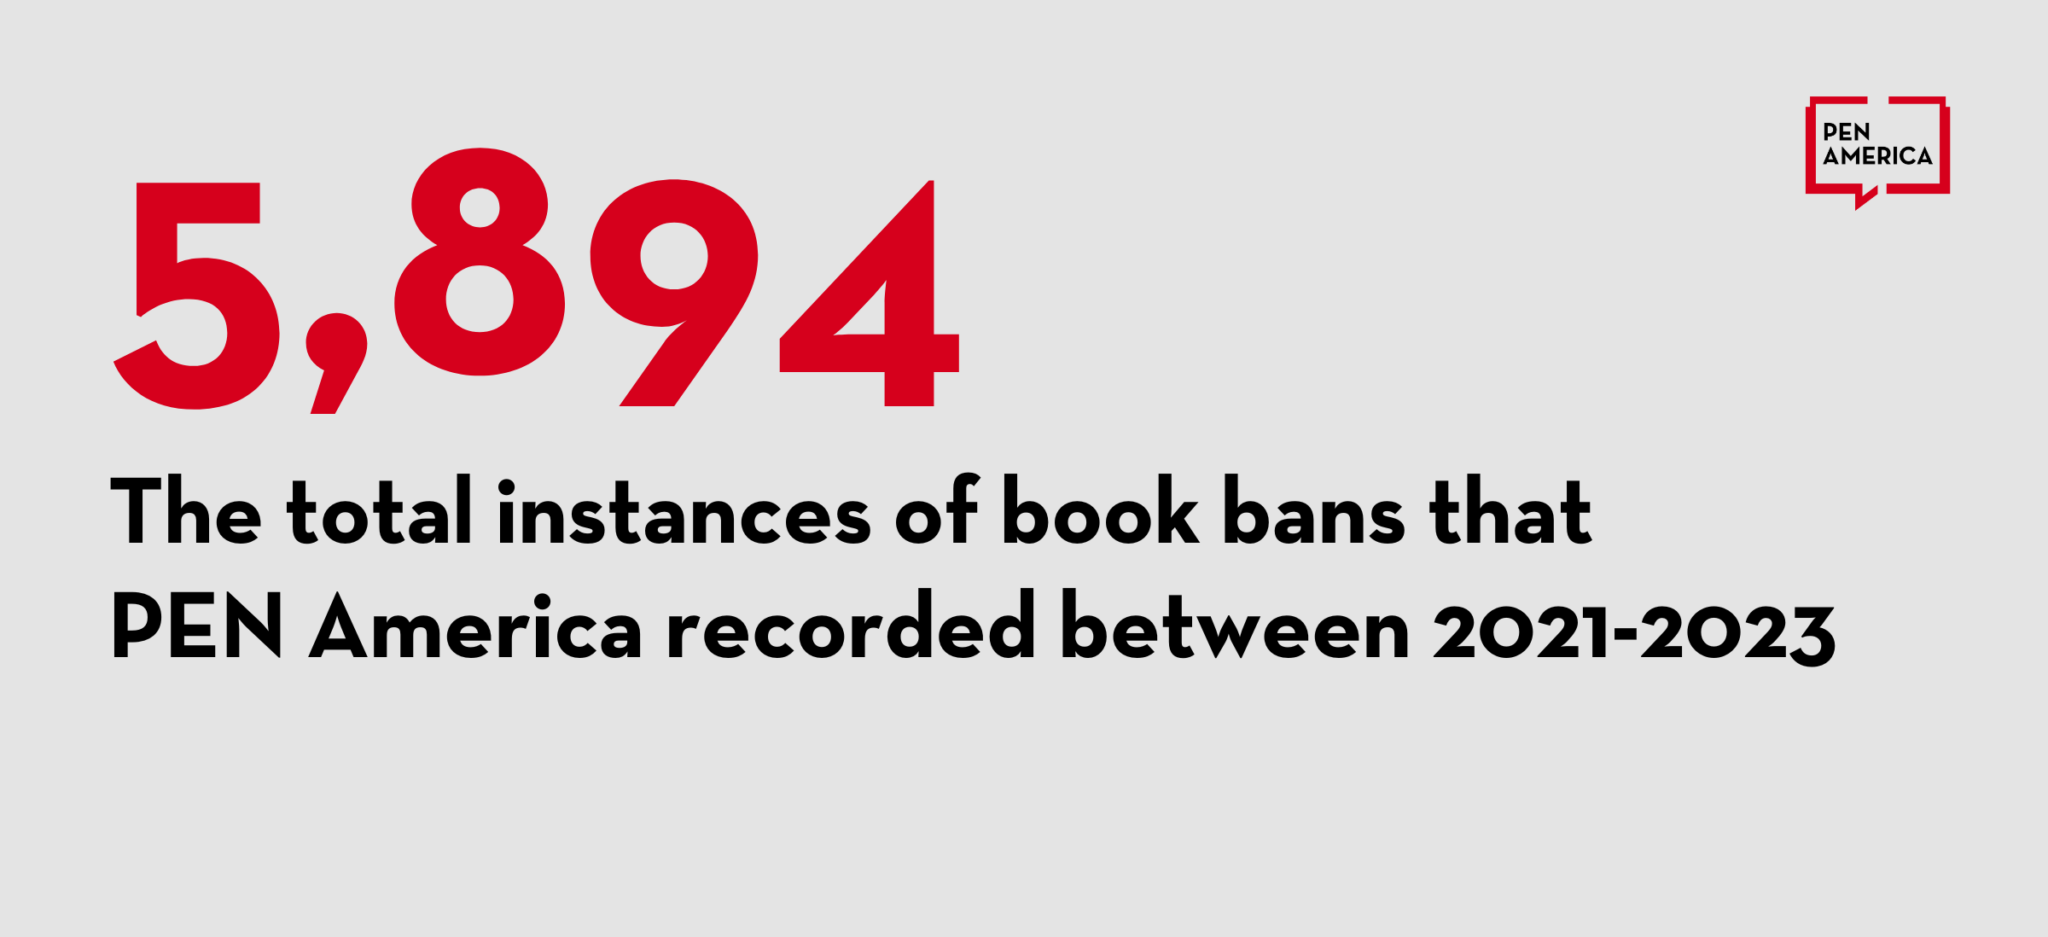 PEN America Releases New Data and Analysis on Two Years of Book Banning